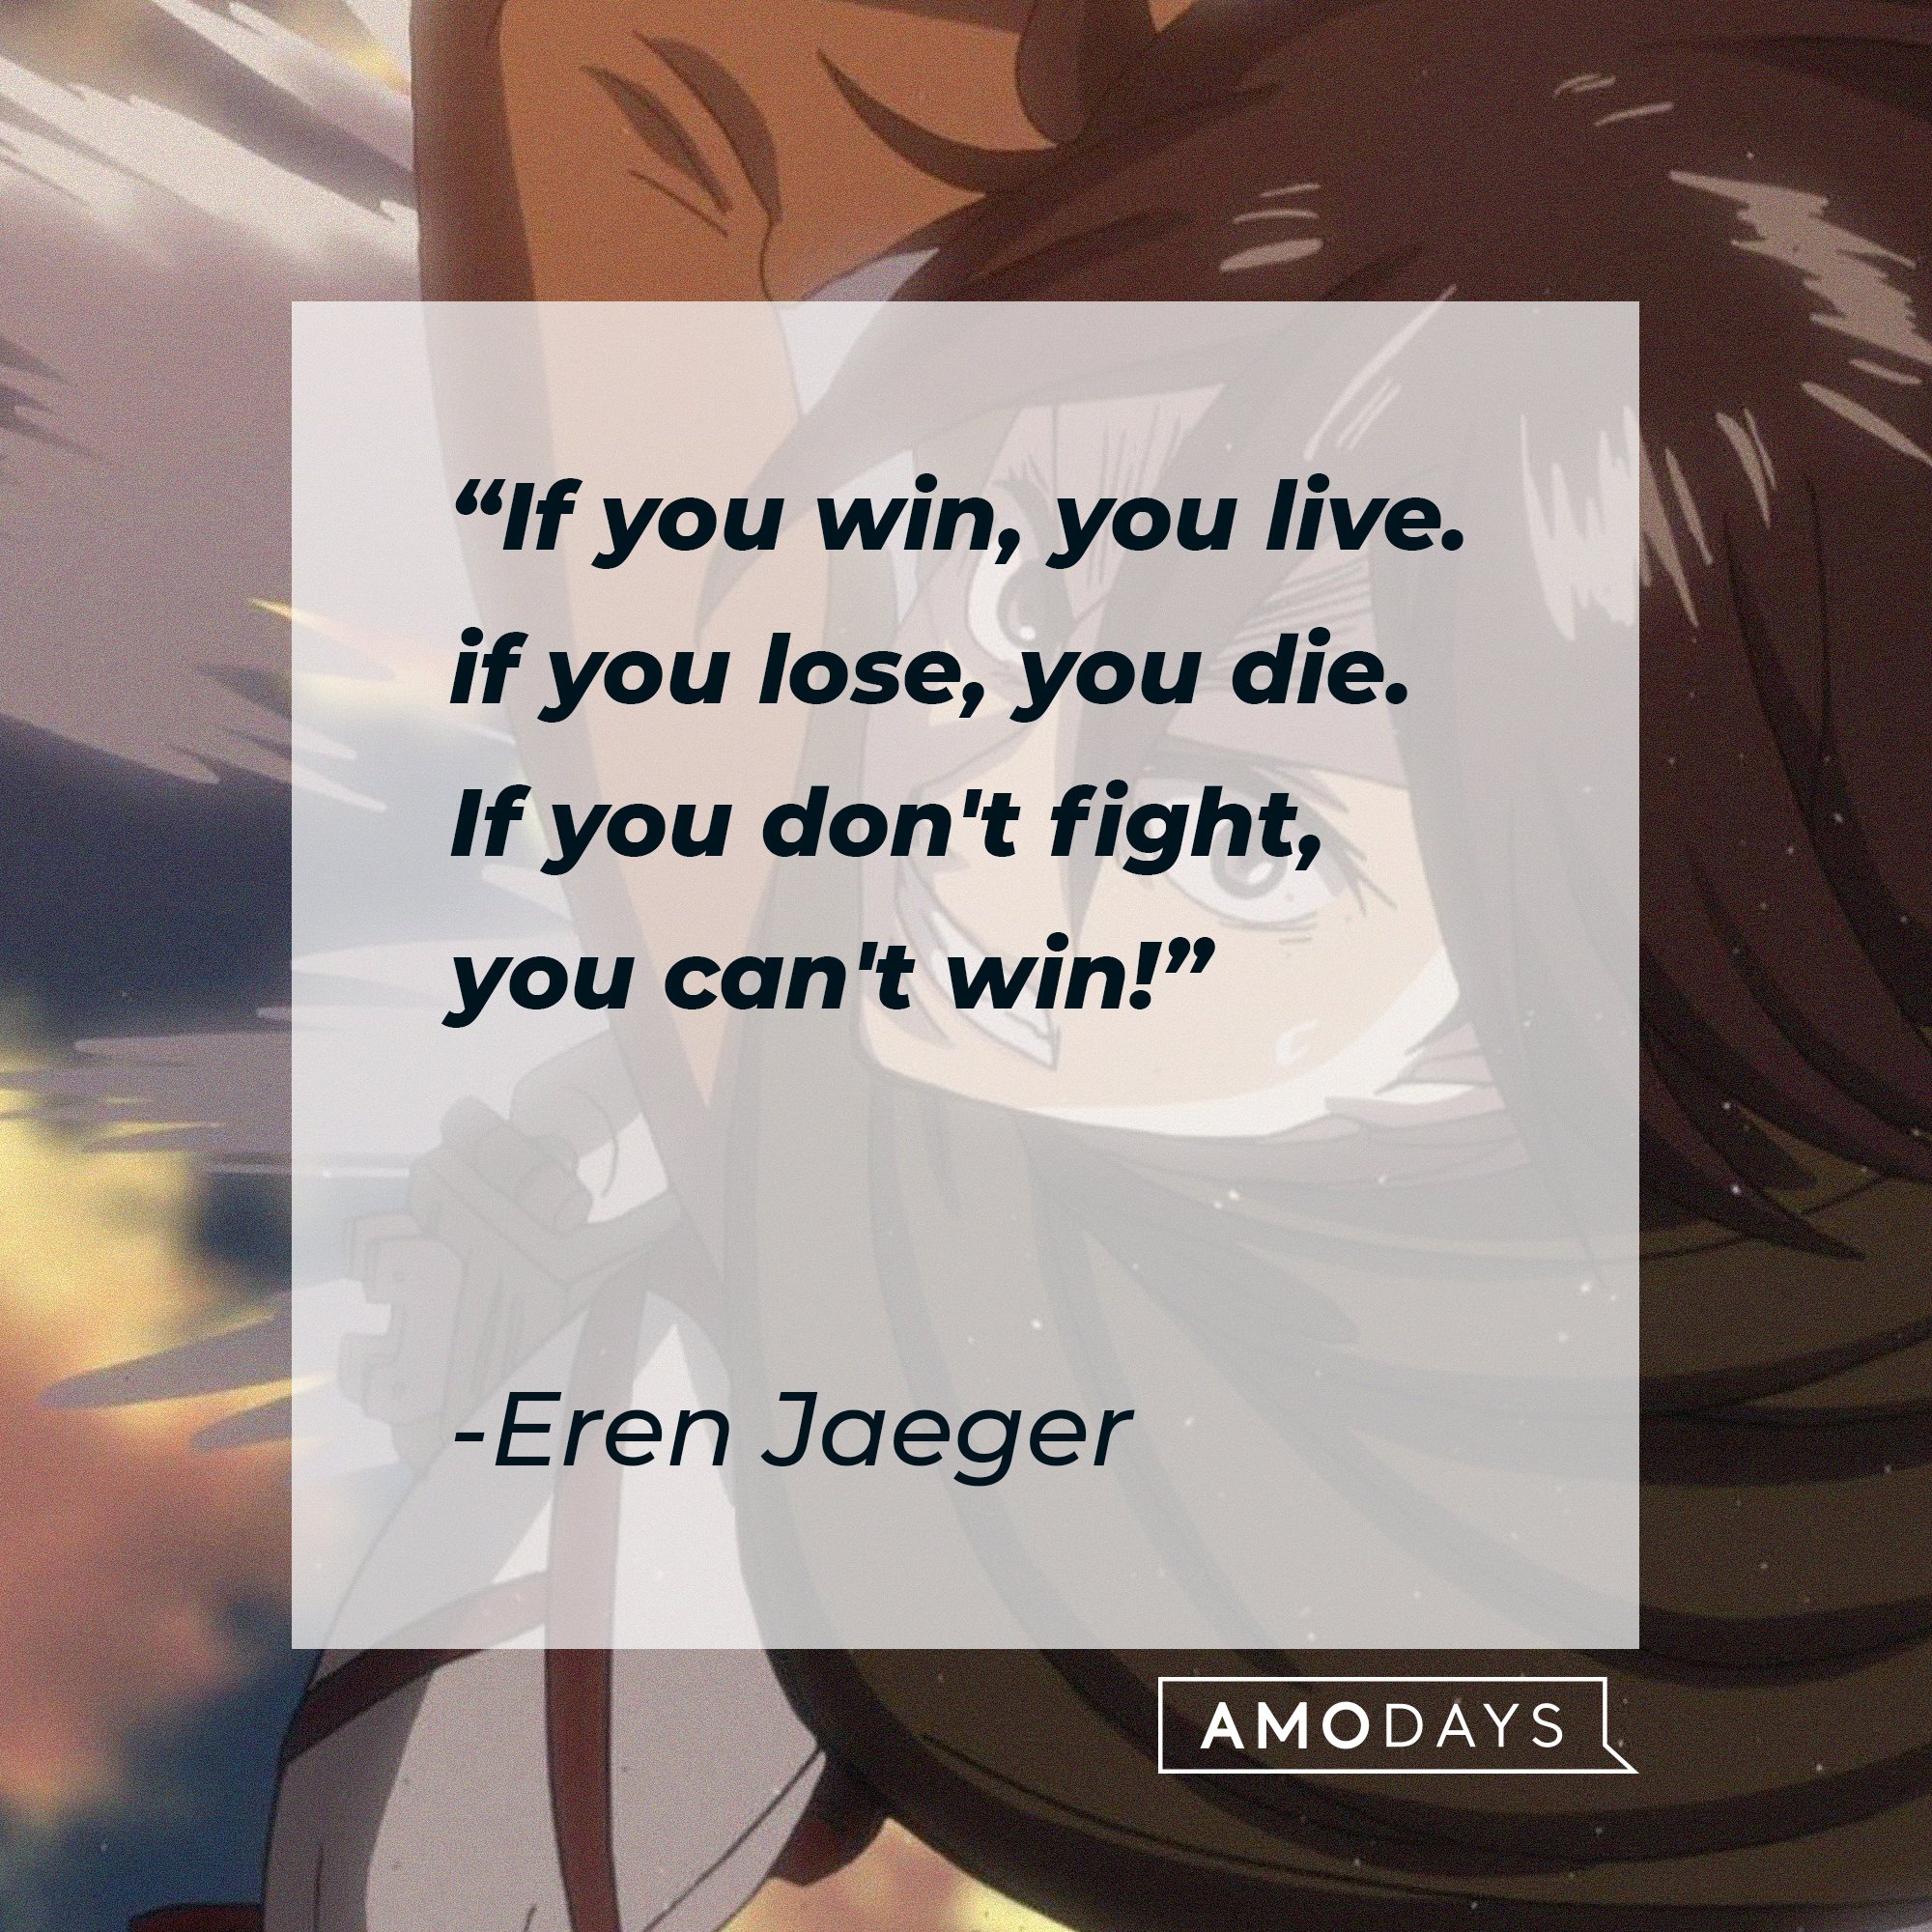 Eren Jaeger’s quote: "If you win, you live. if you lose, you die. If you don't fight, you can't win!" | Image: AmoDays